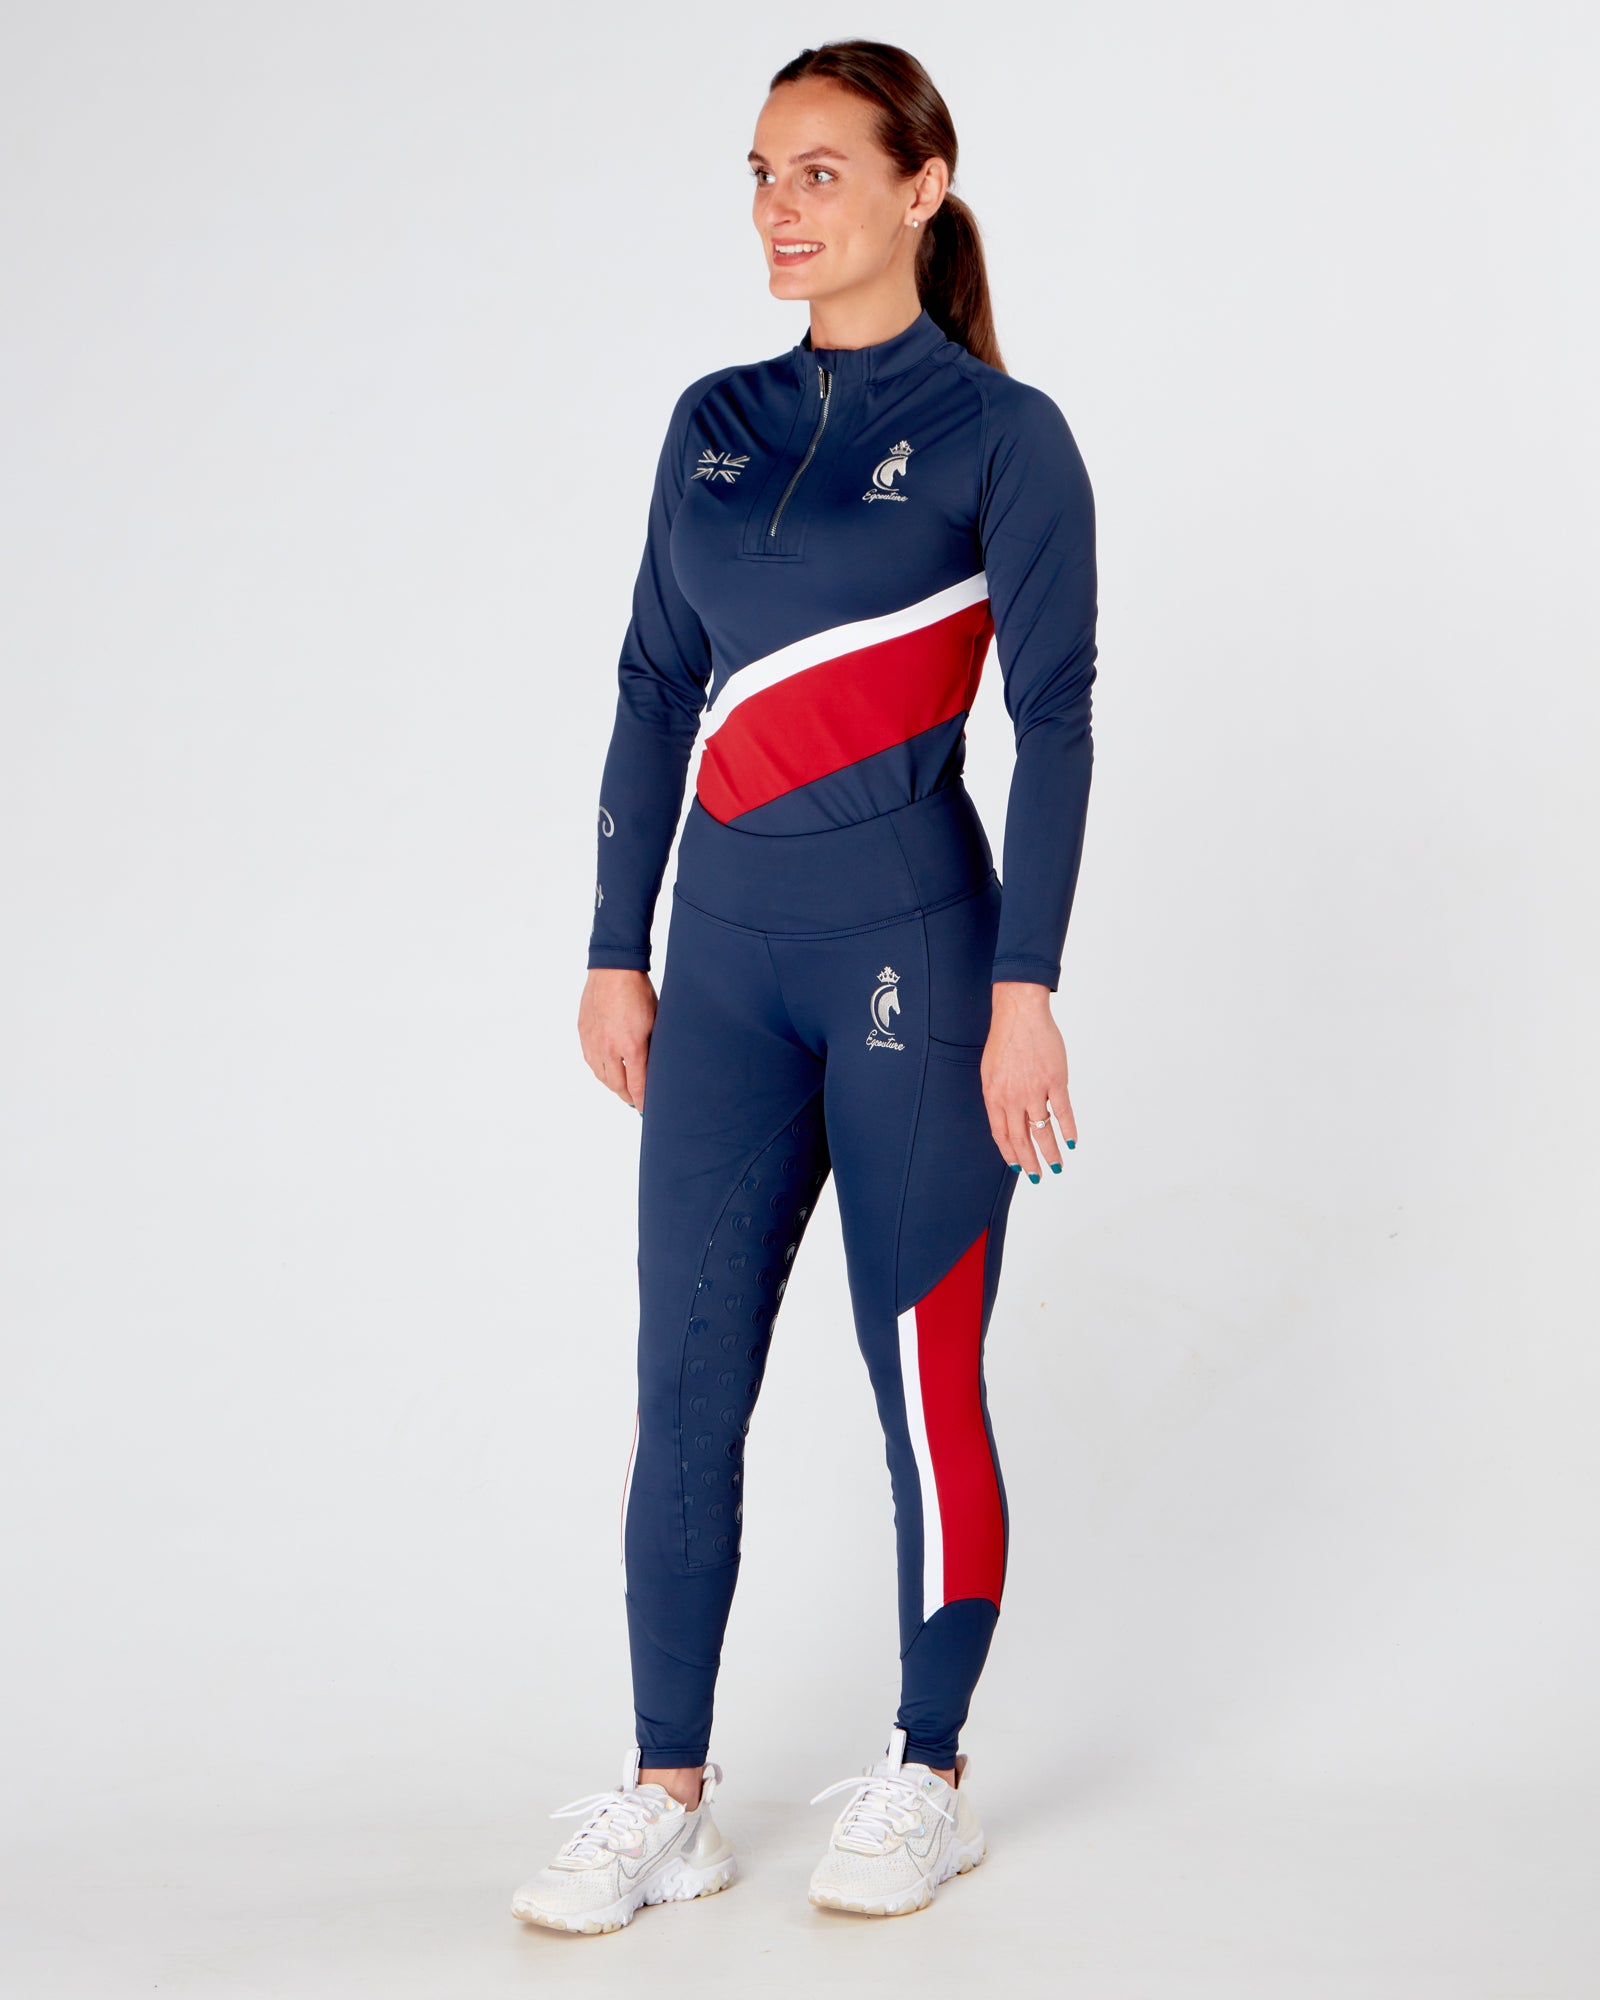 Horse Riding Tights / Leggings with phone pockets and full seat grip -NAVY RED WHITE